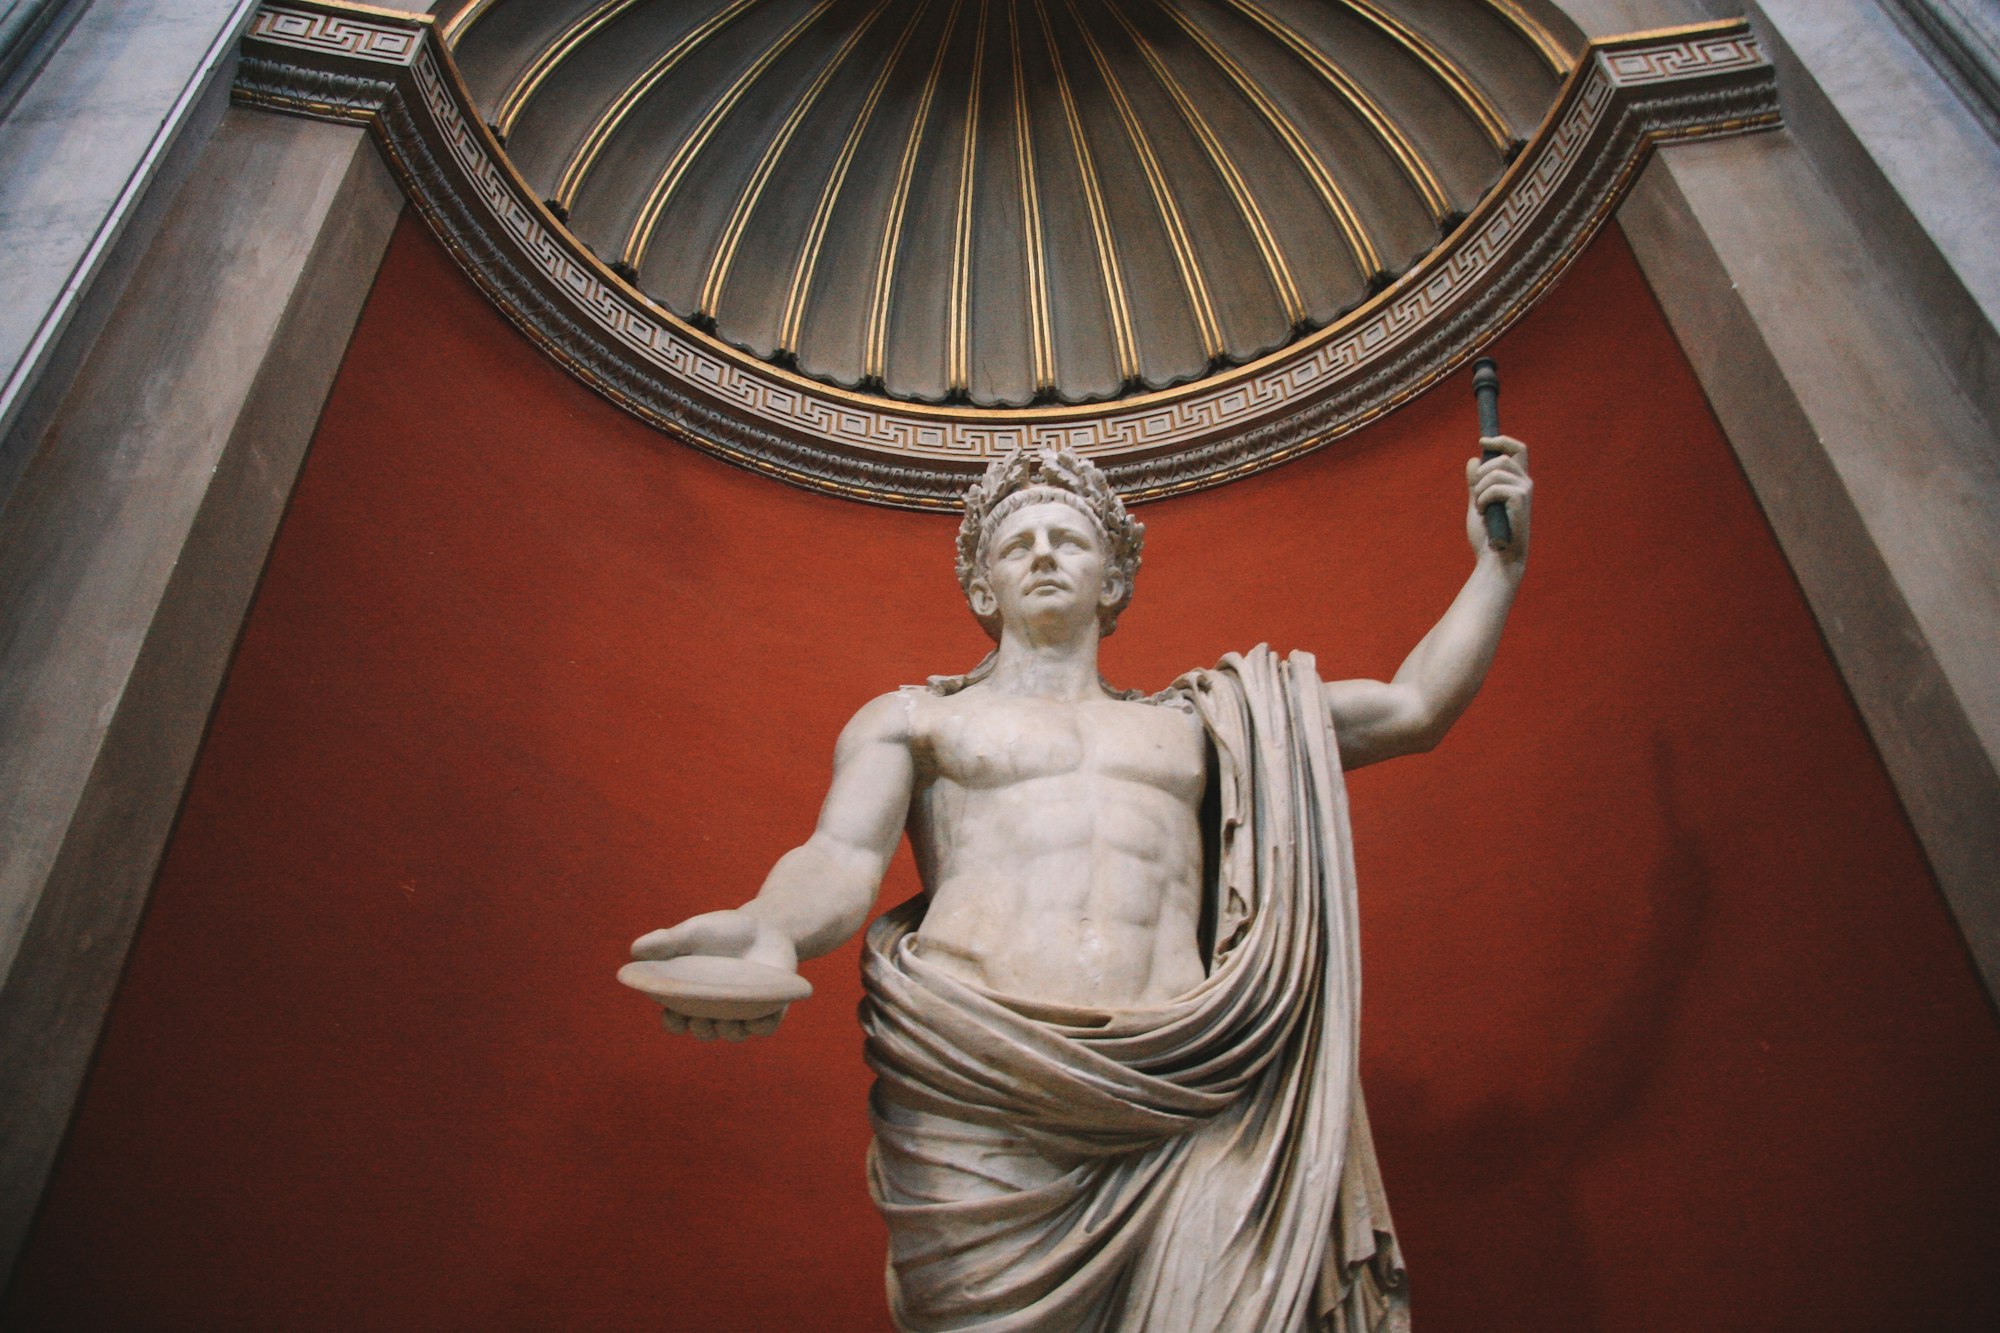 The most important lesson from stoicism